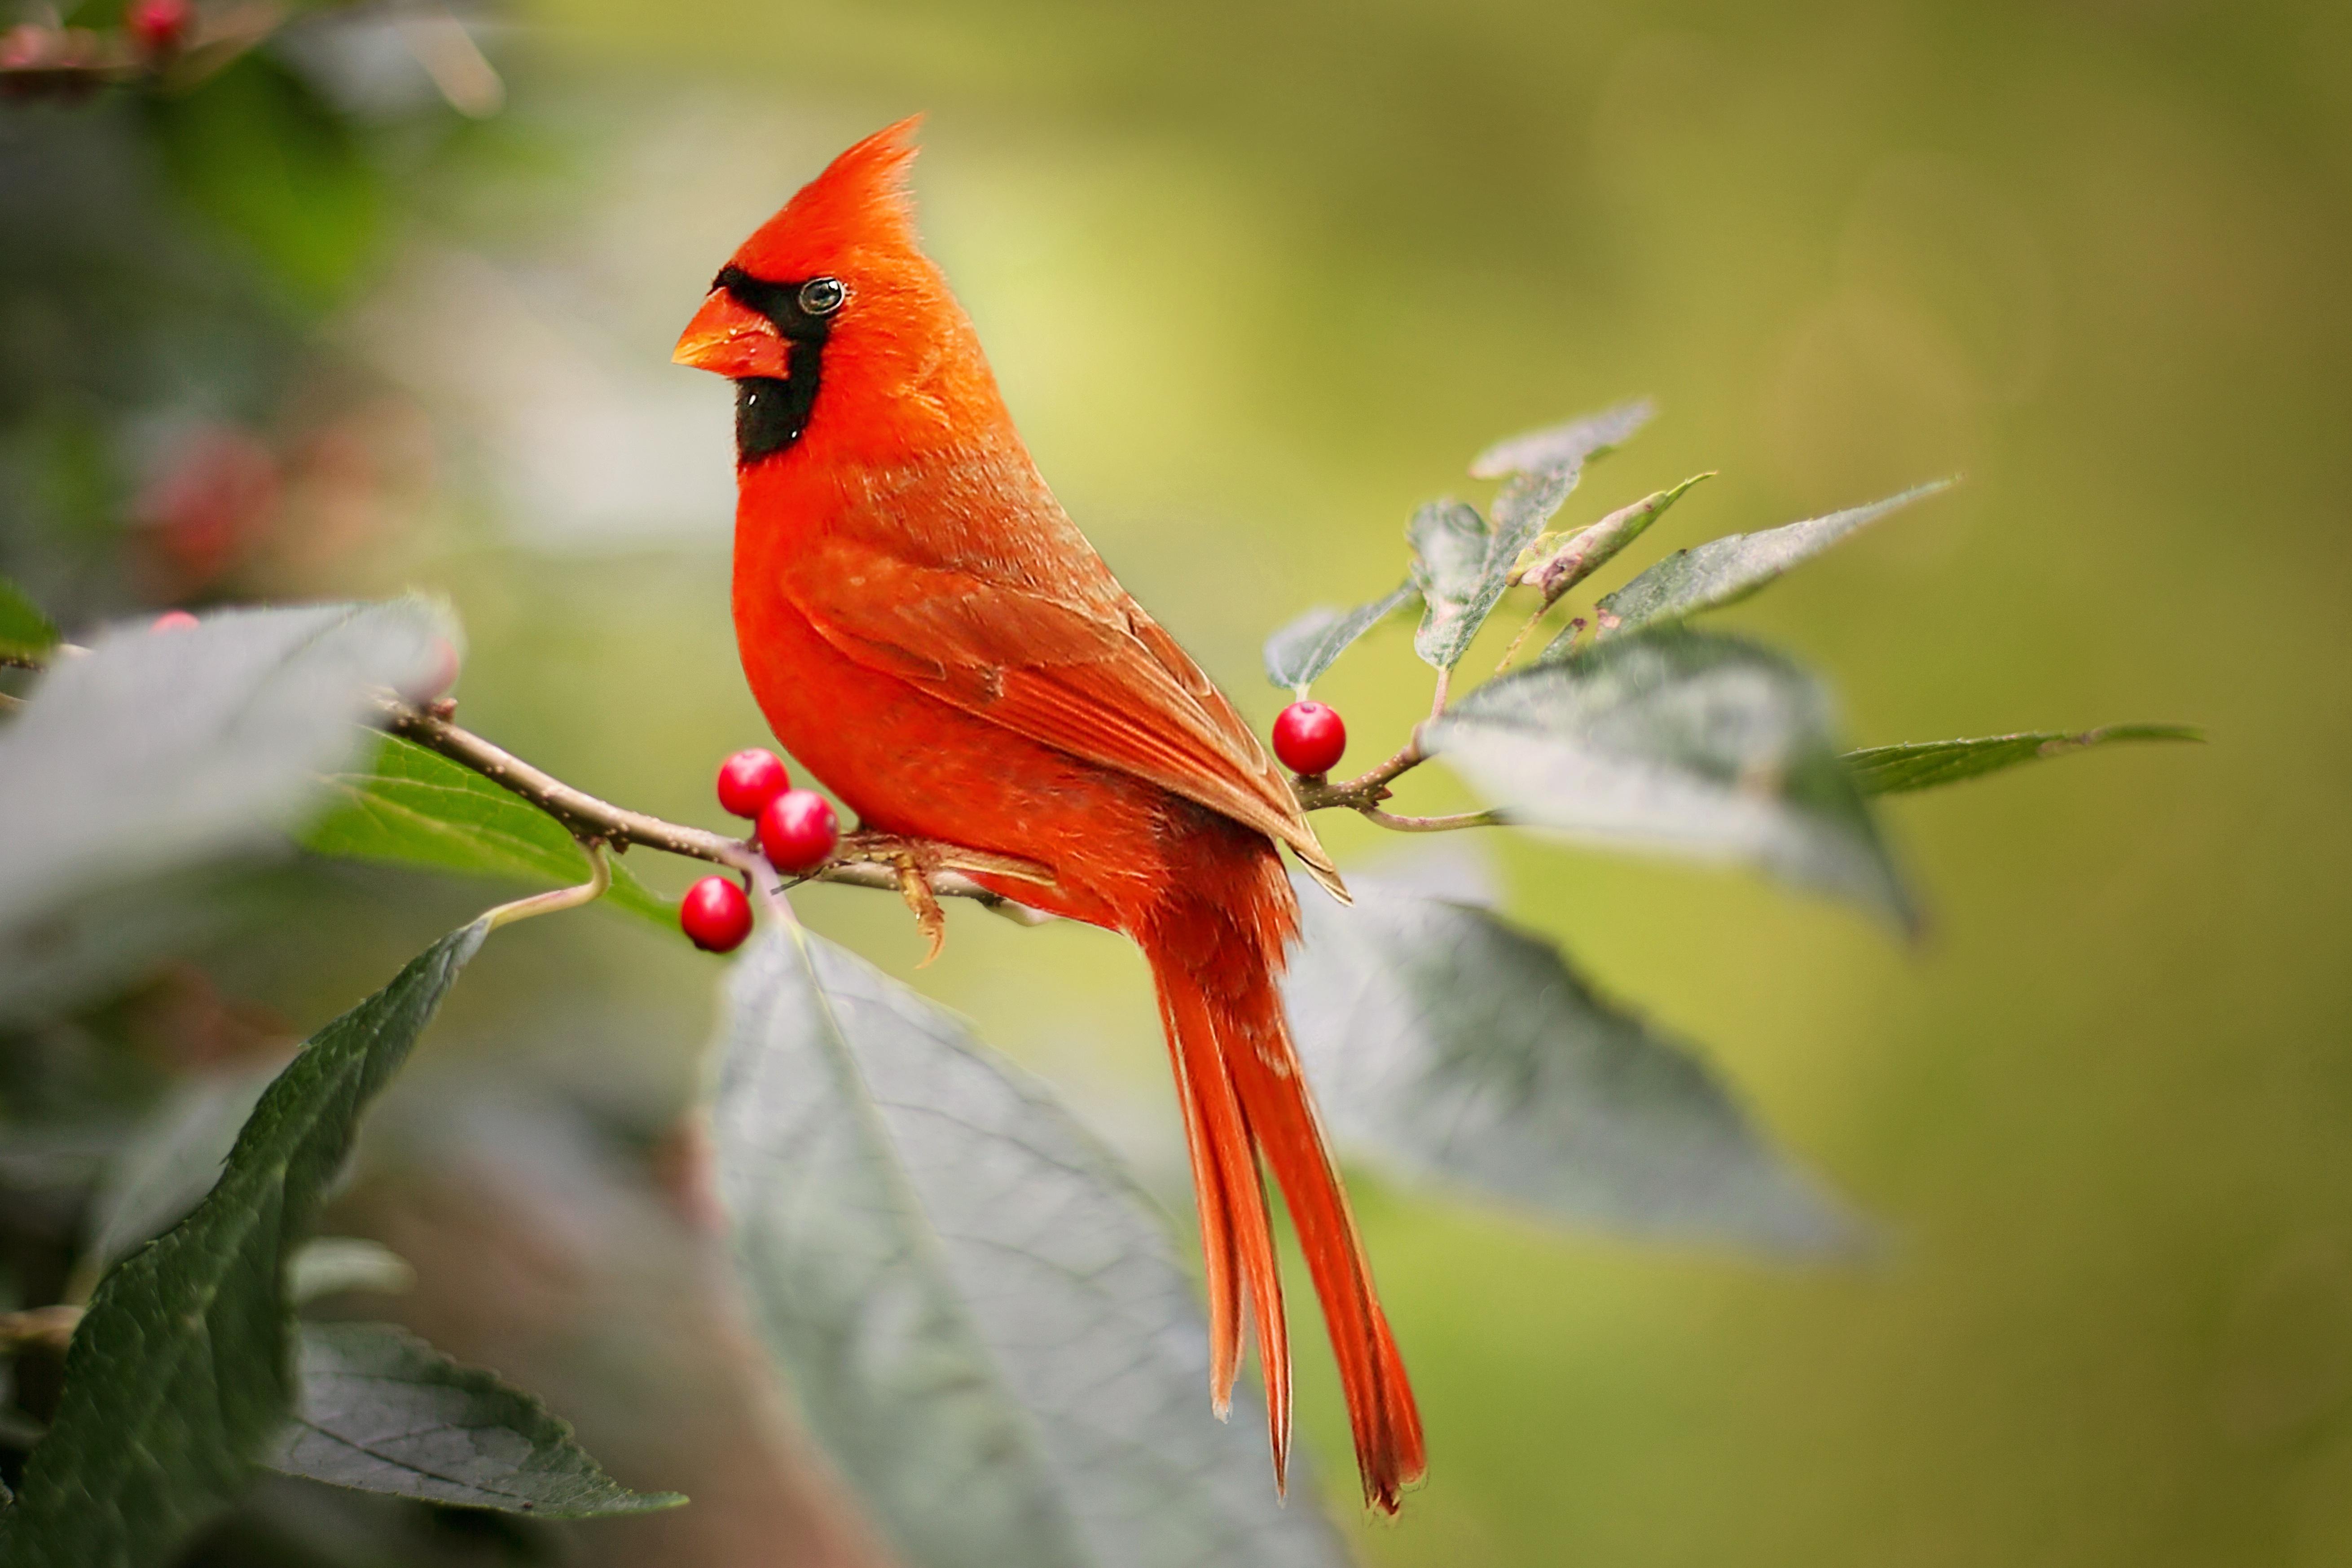 Cardinal 4K wallpaper for your desktop or mobile screen free and easy to download